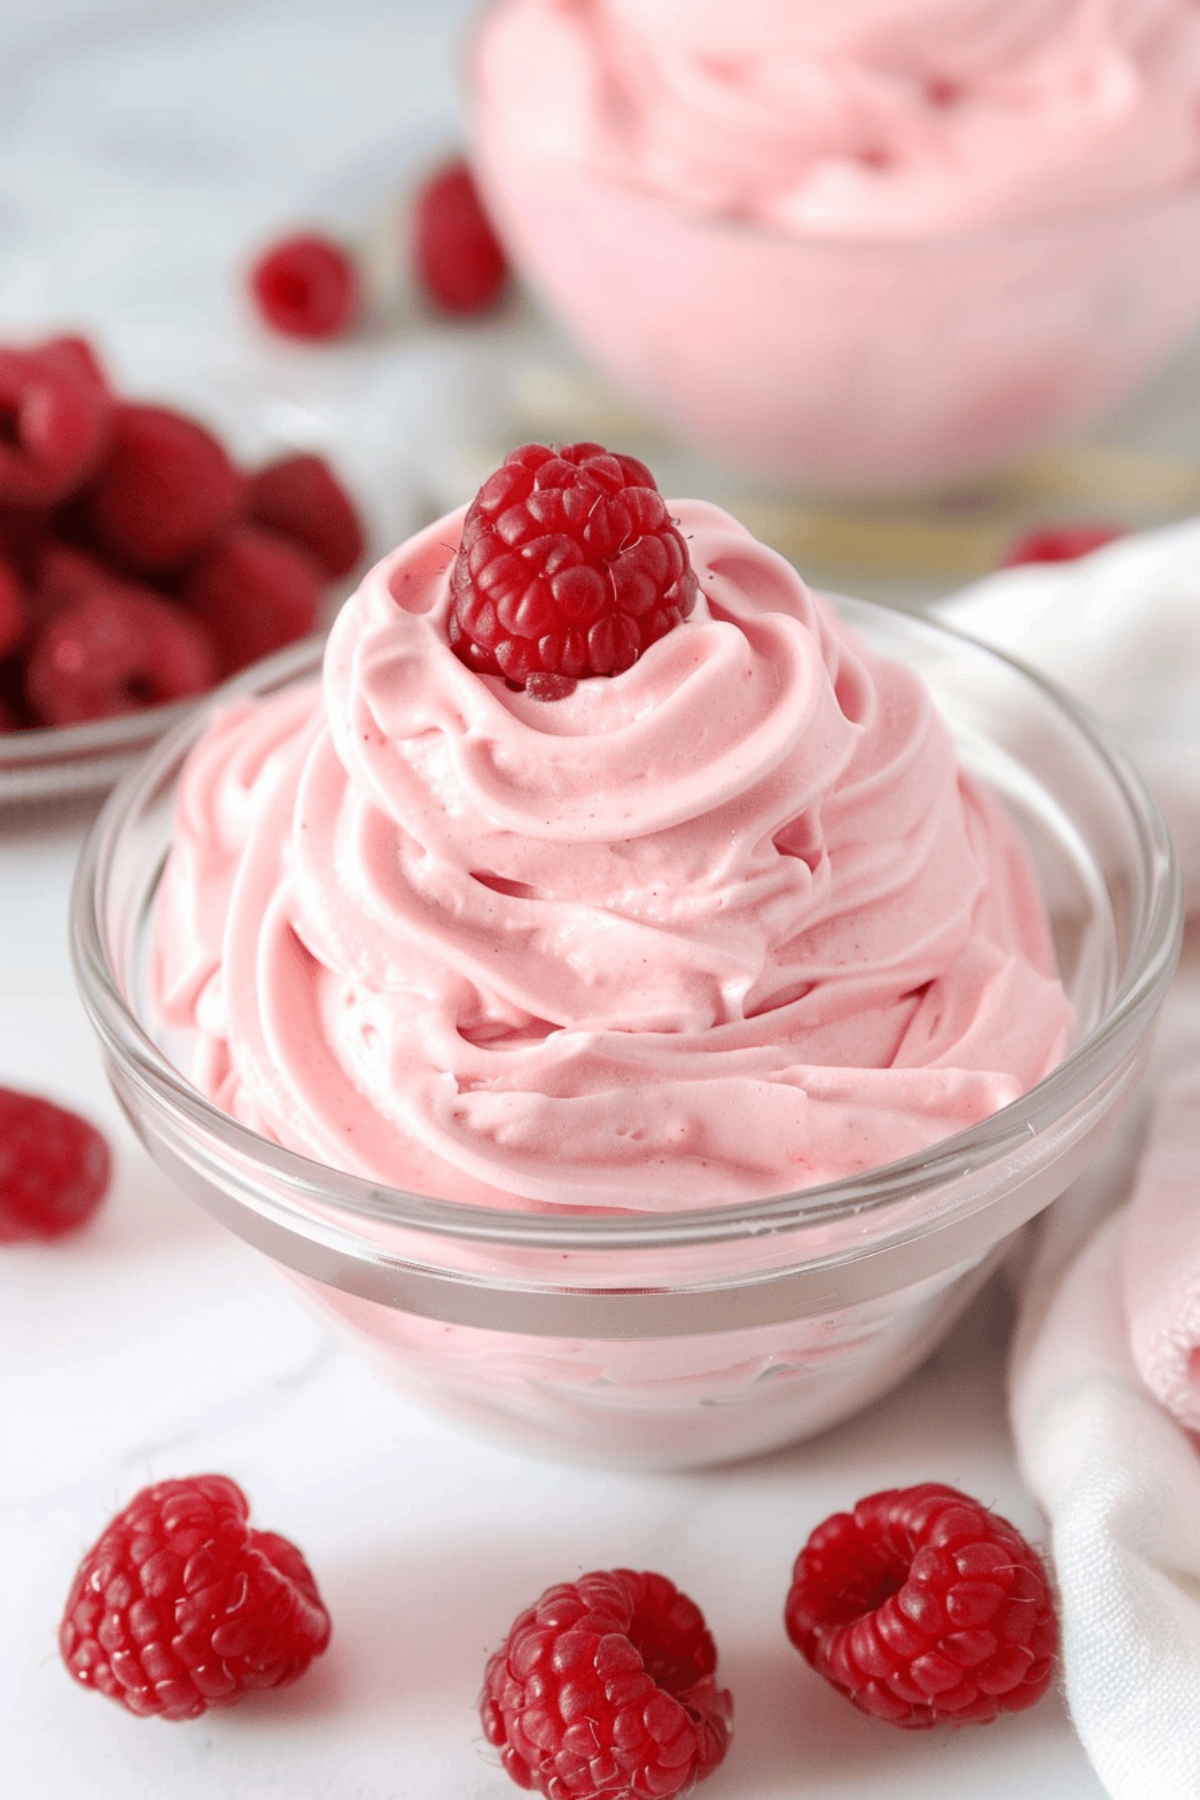 Swirls of raspberry whipped cream in a glass bowl woth fresh berries